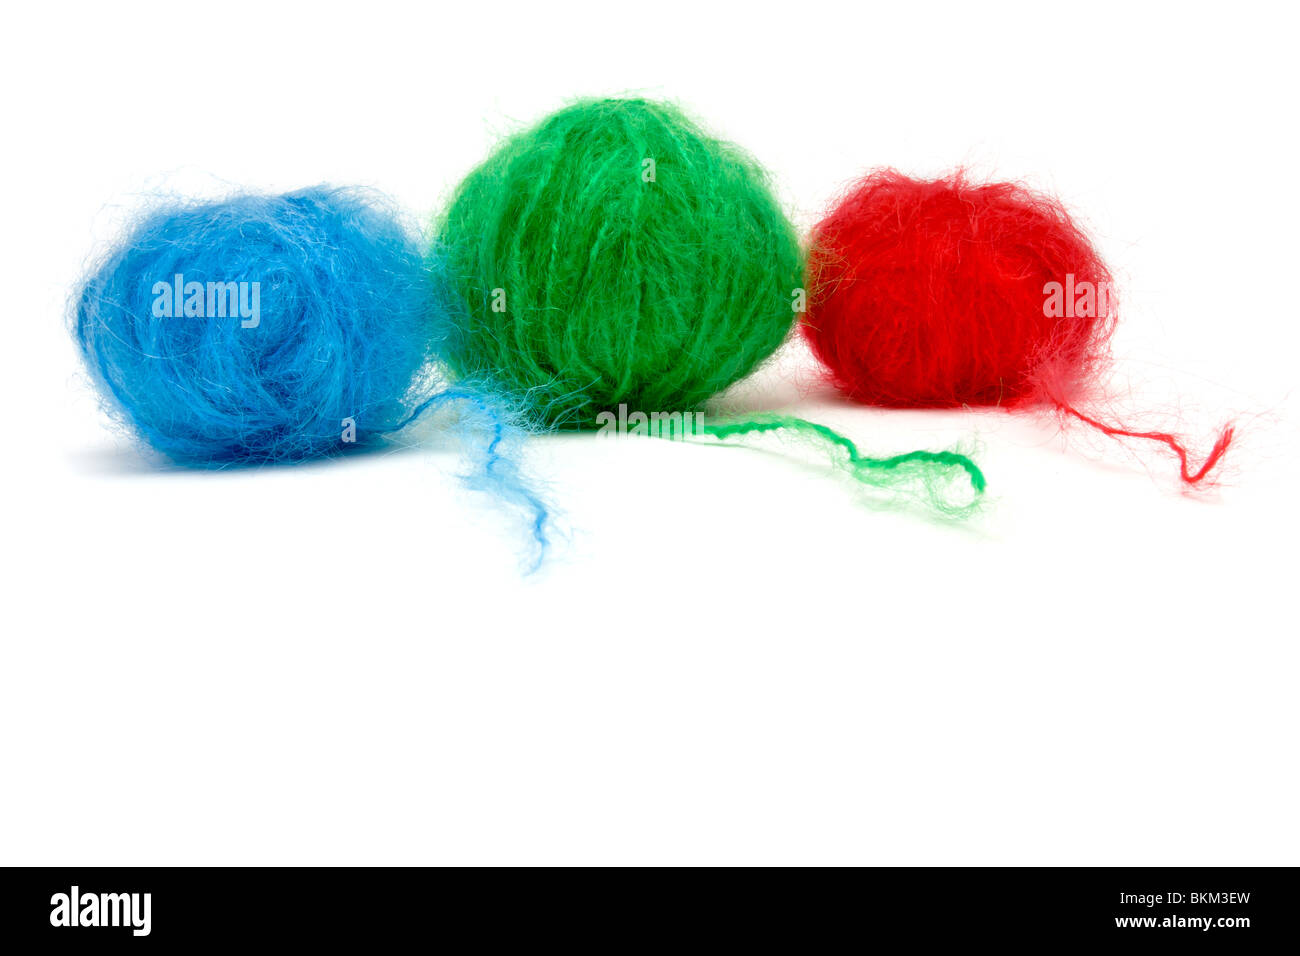 A line up of red, green and blue balls of mohair wool isolated against white background. Stock Photo